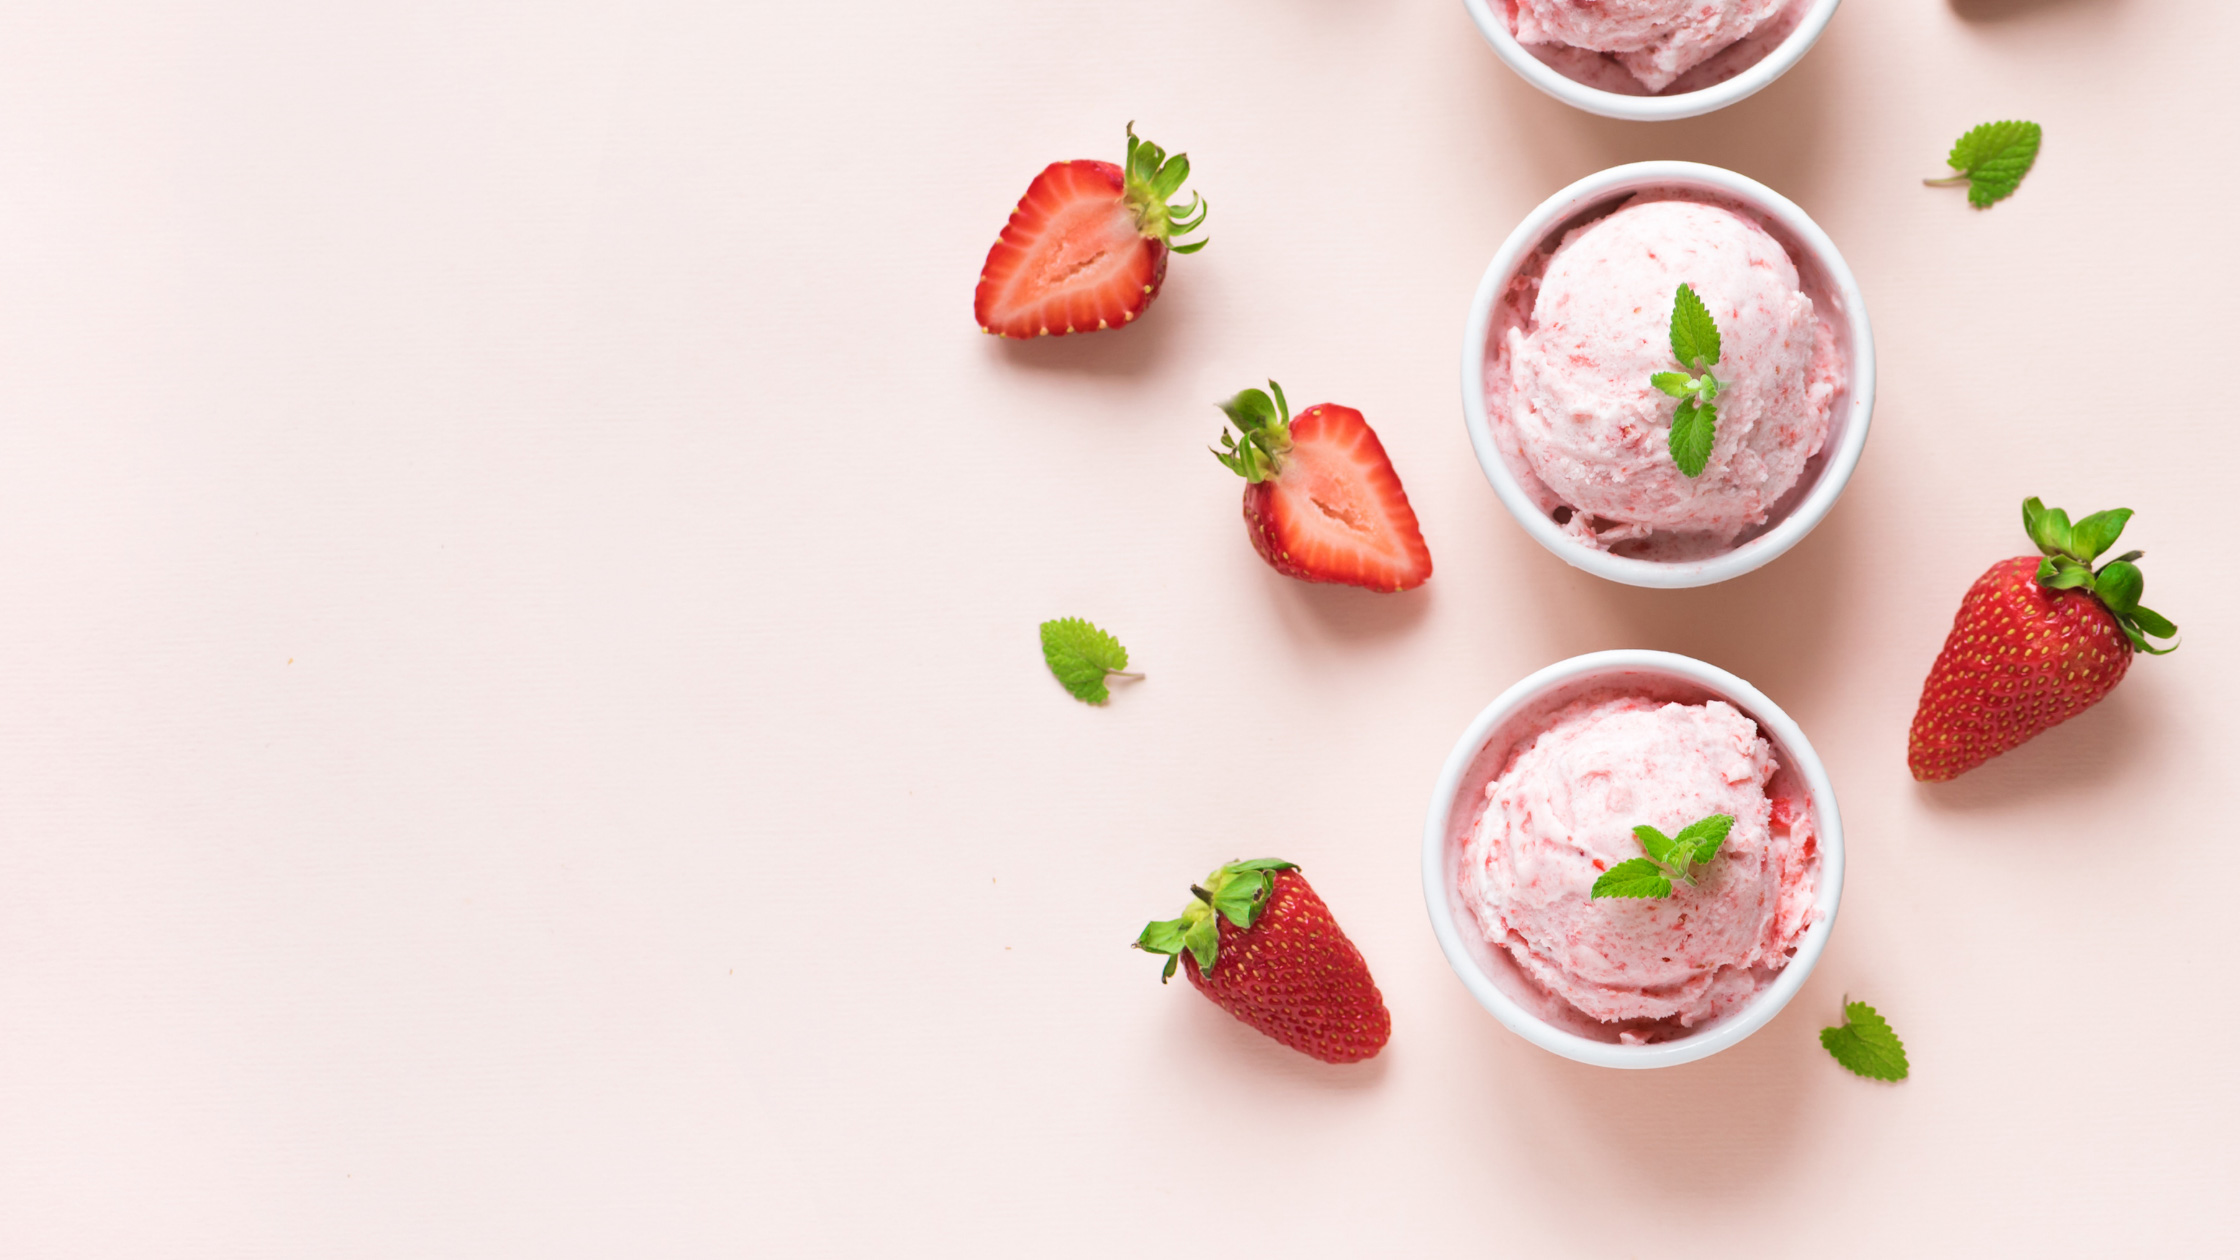 Strawberries and ice cream in a bowl Image - Canva